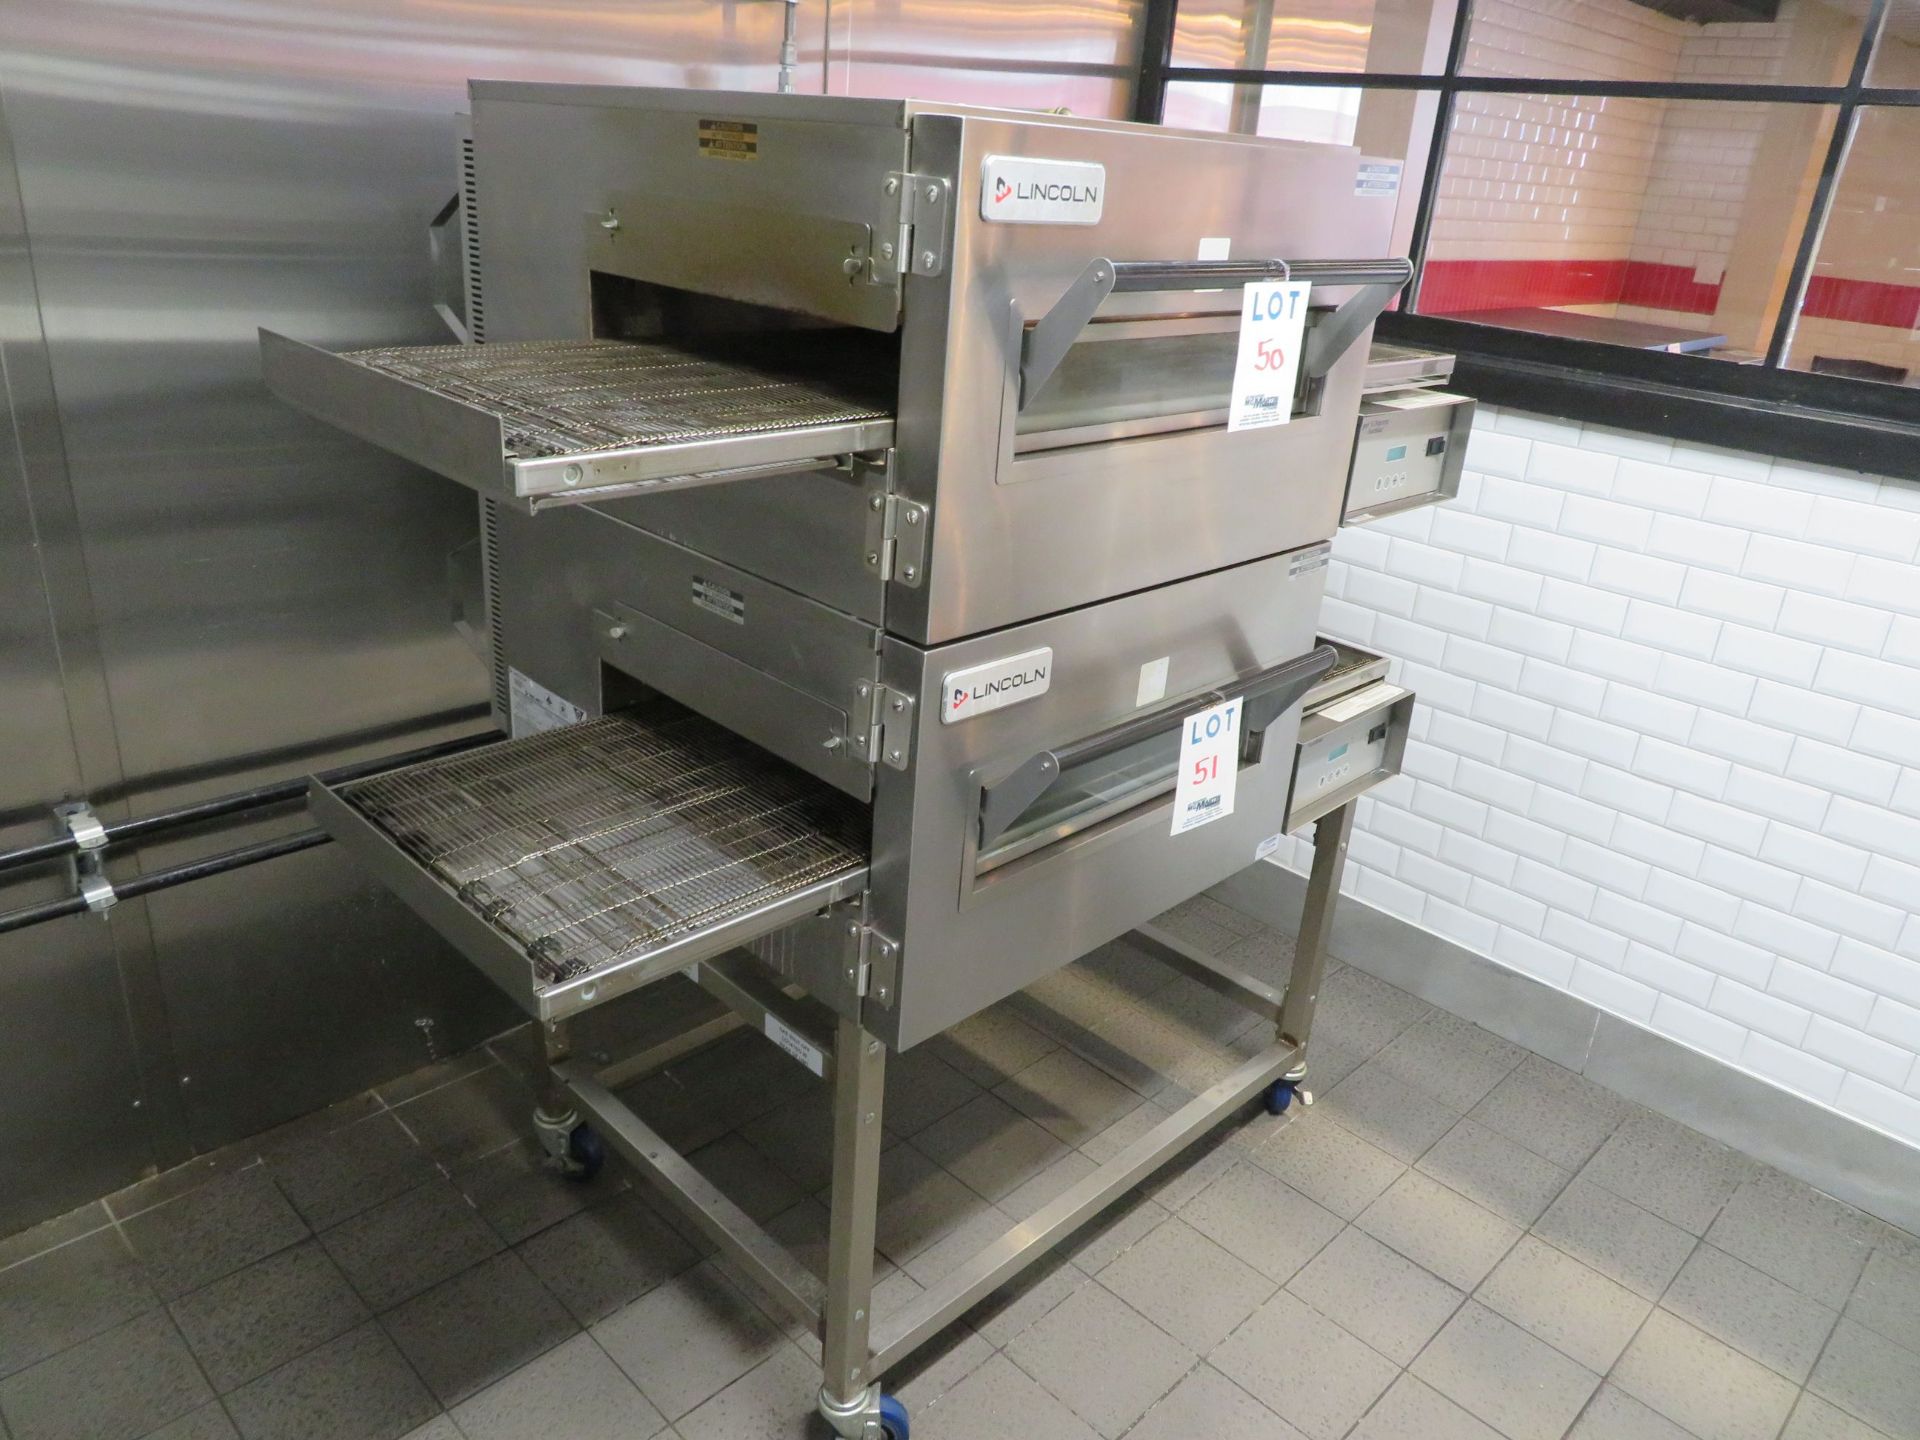 LINCOLN stainless steel pizza gas oven with conveyor (18"wide x 53" length), Mod: 1116-000-